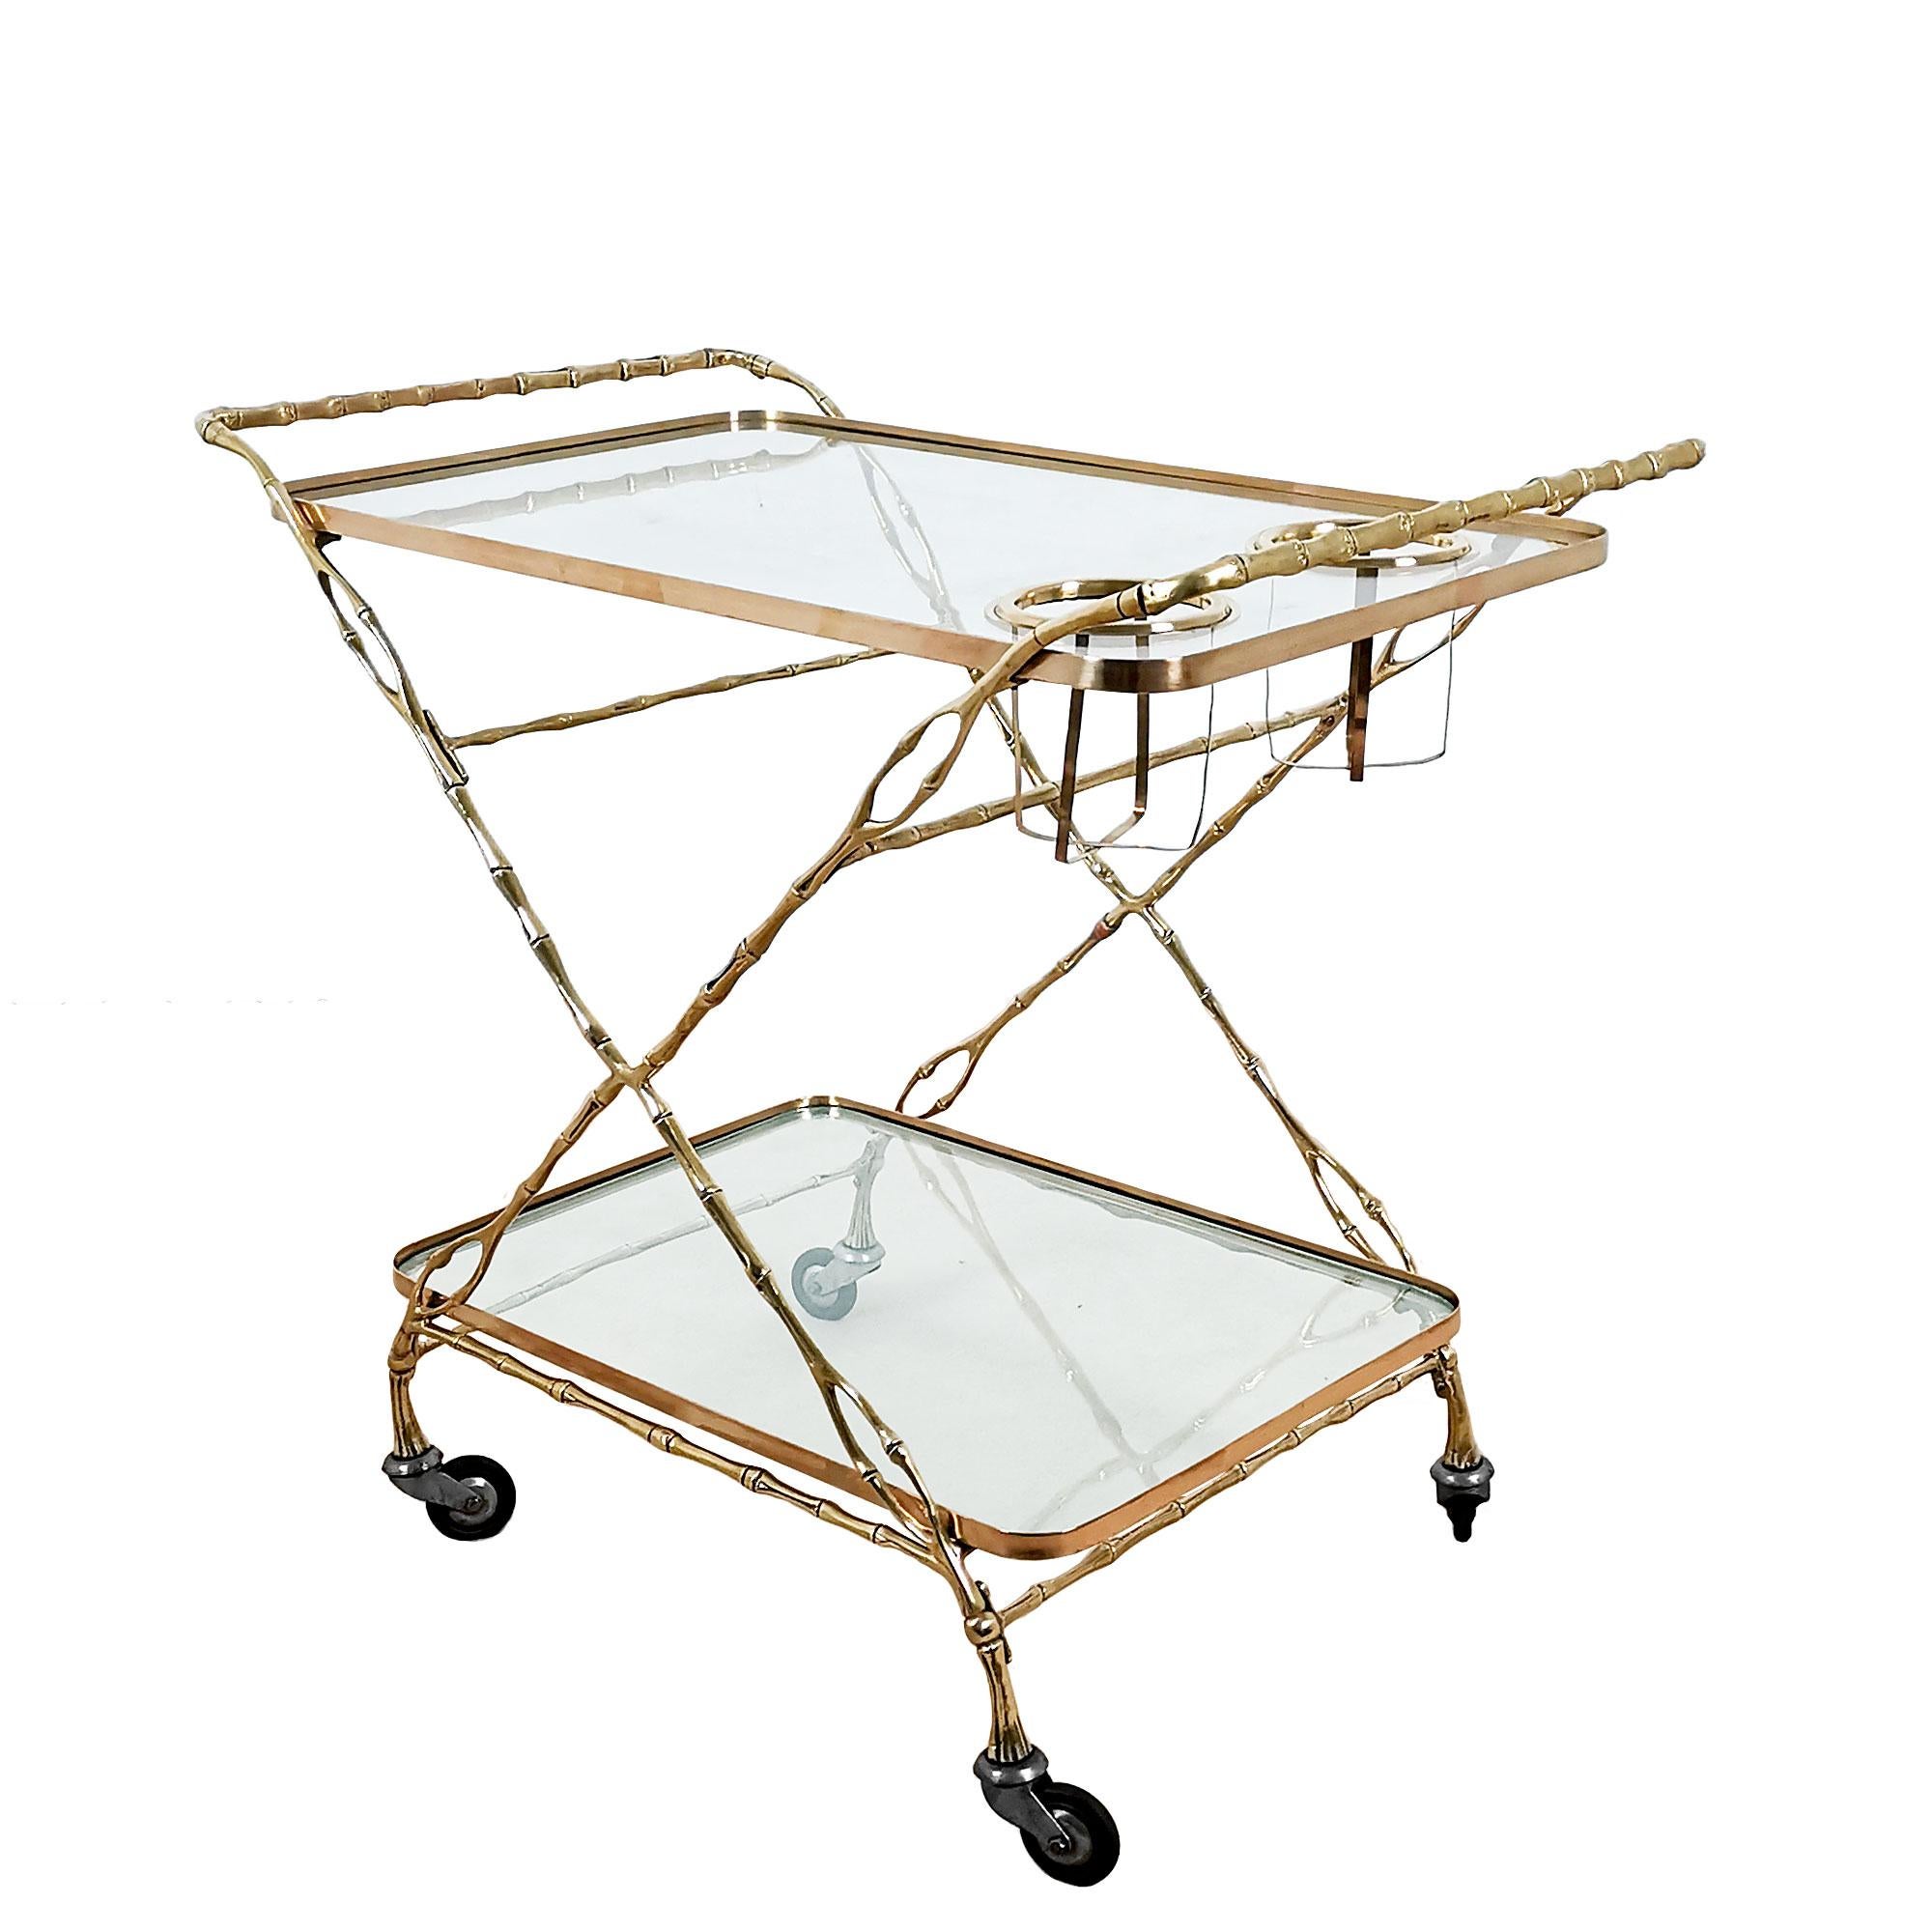 Bar cart with wheels, two levels in solid brass and glass, high quality. In the style of Maison Baguès.
Spain, Barcelona c. 1960.